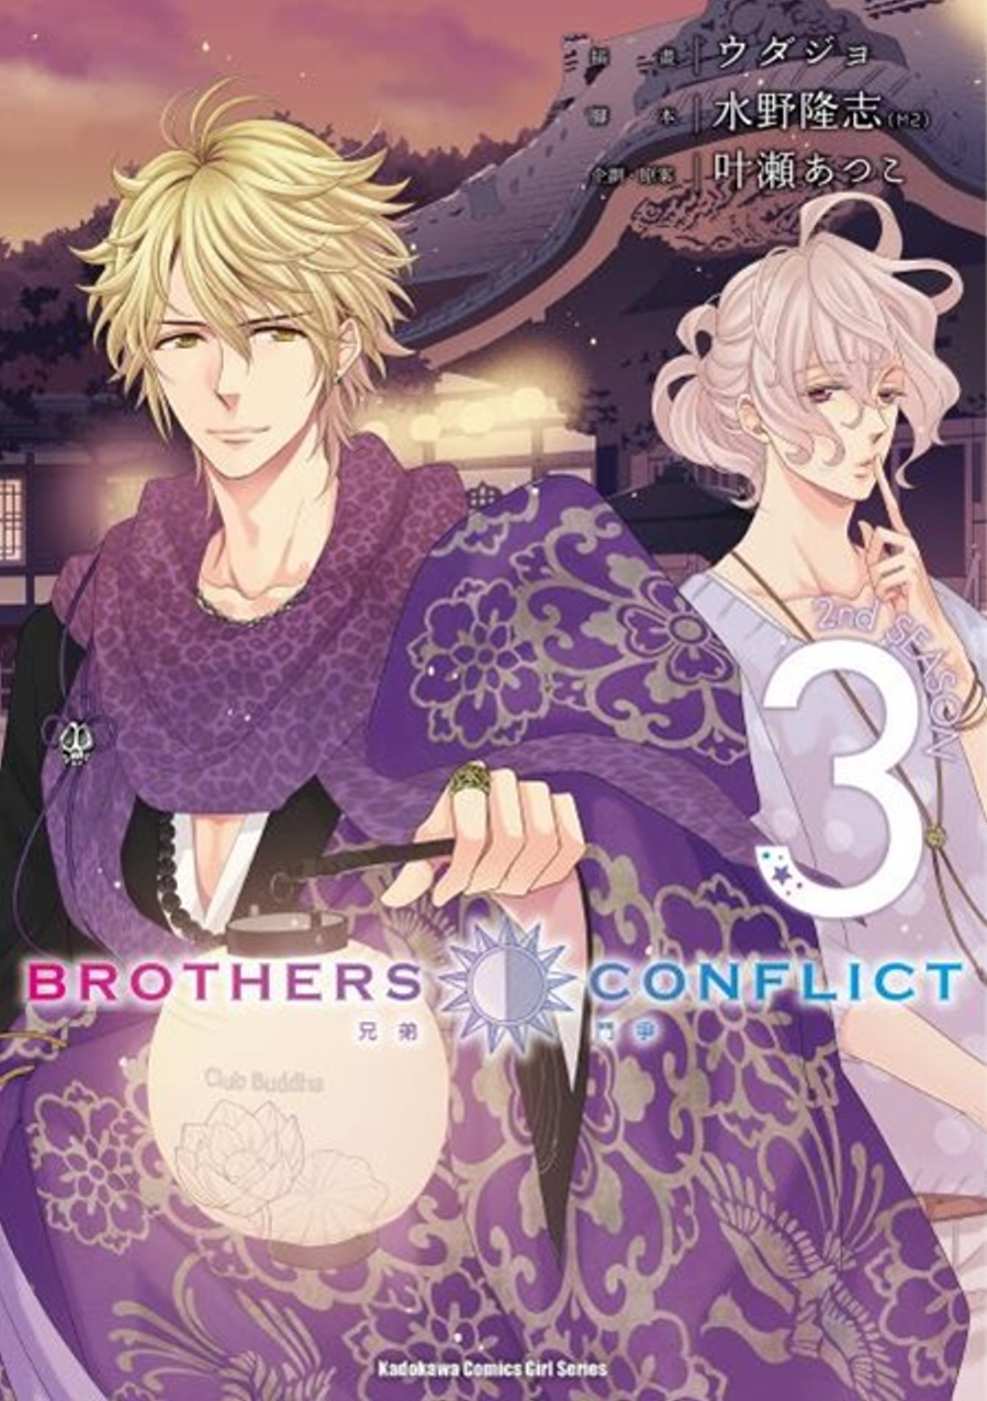 BROTHERS CONFLICT 2nd SEASON (...